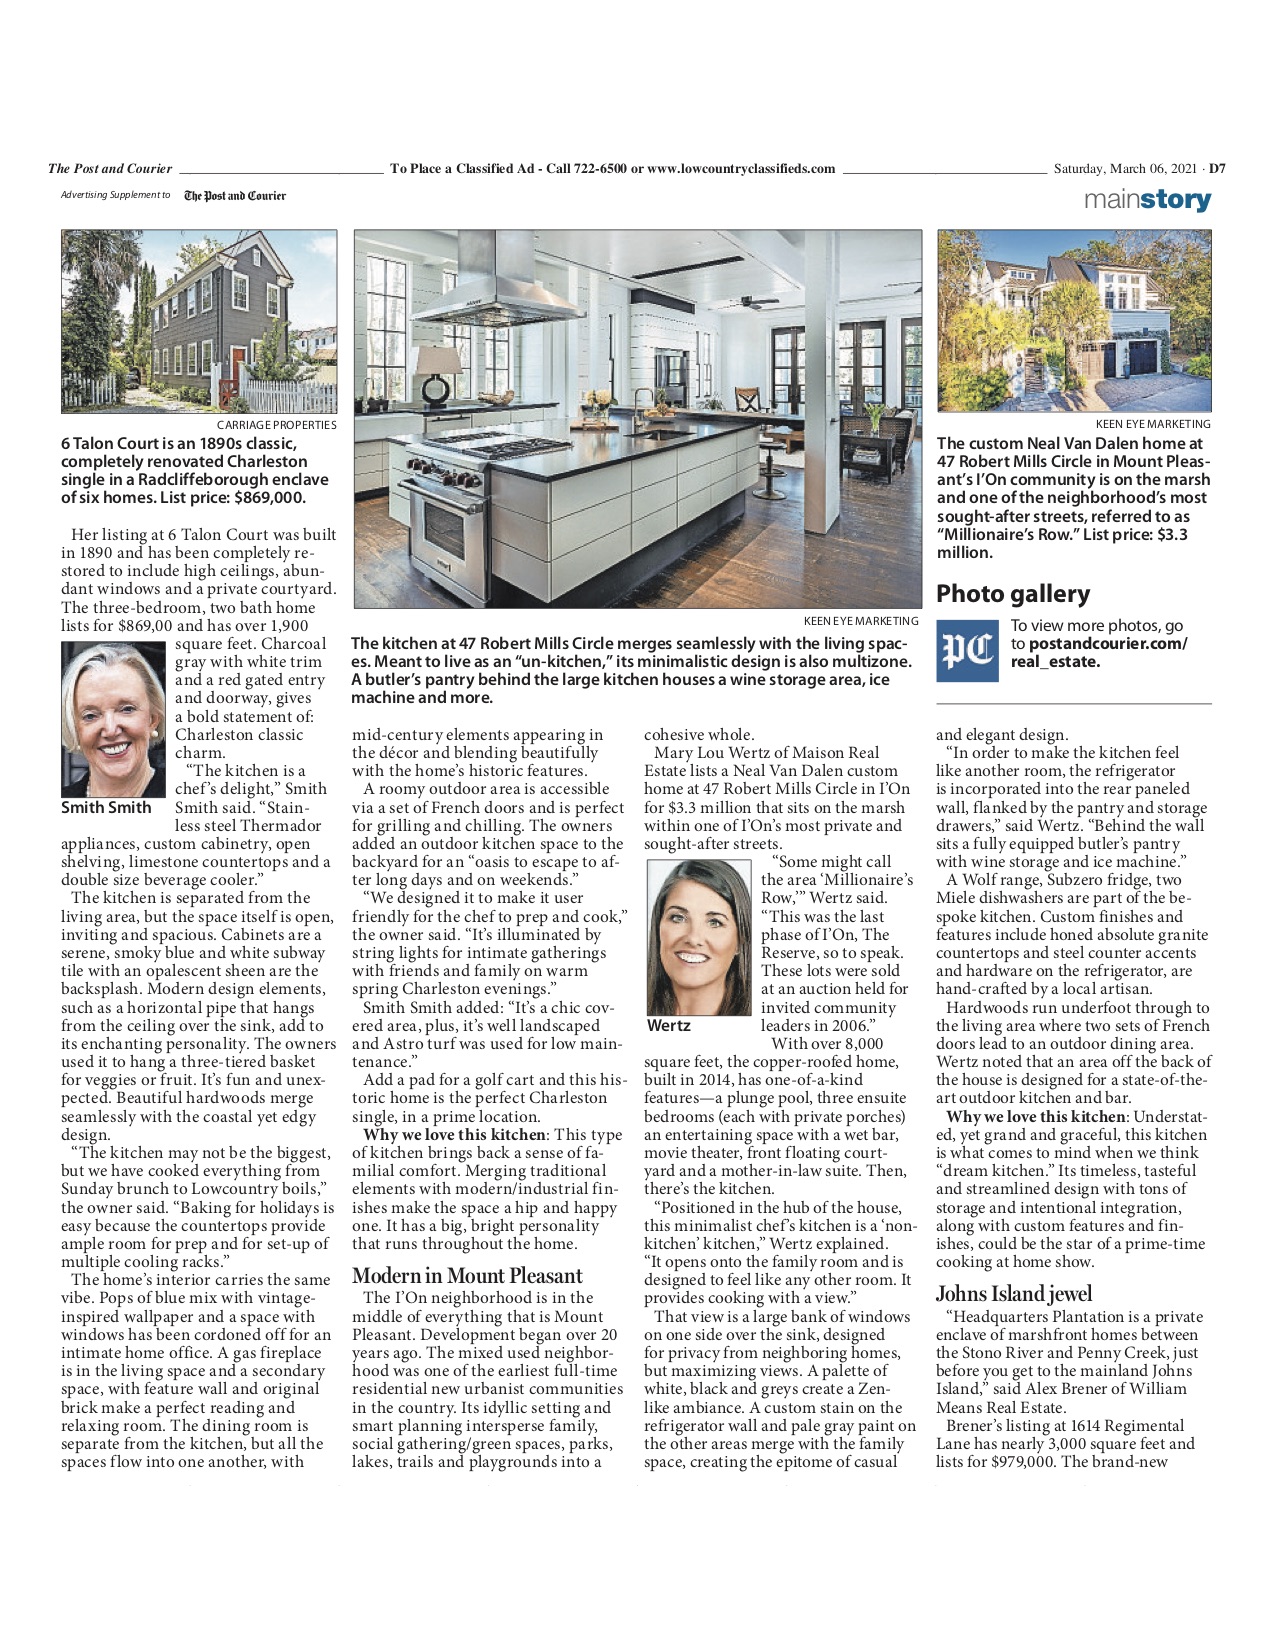 Beautiful Kitchens, Post and Courier article